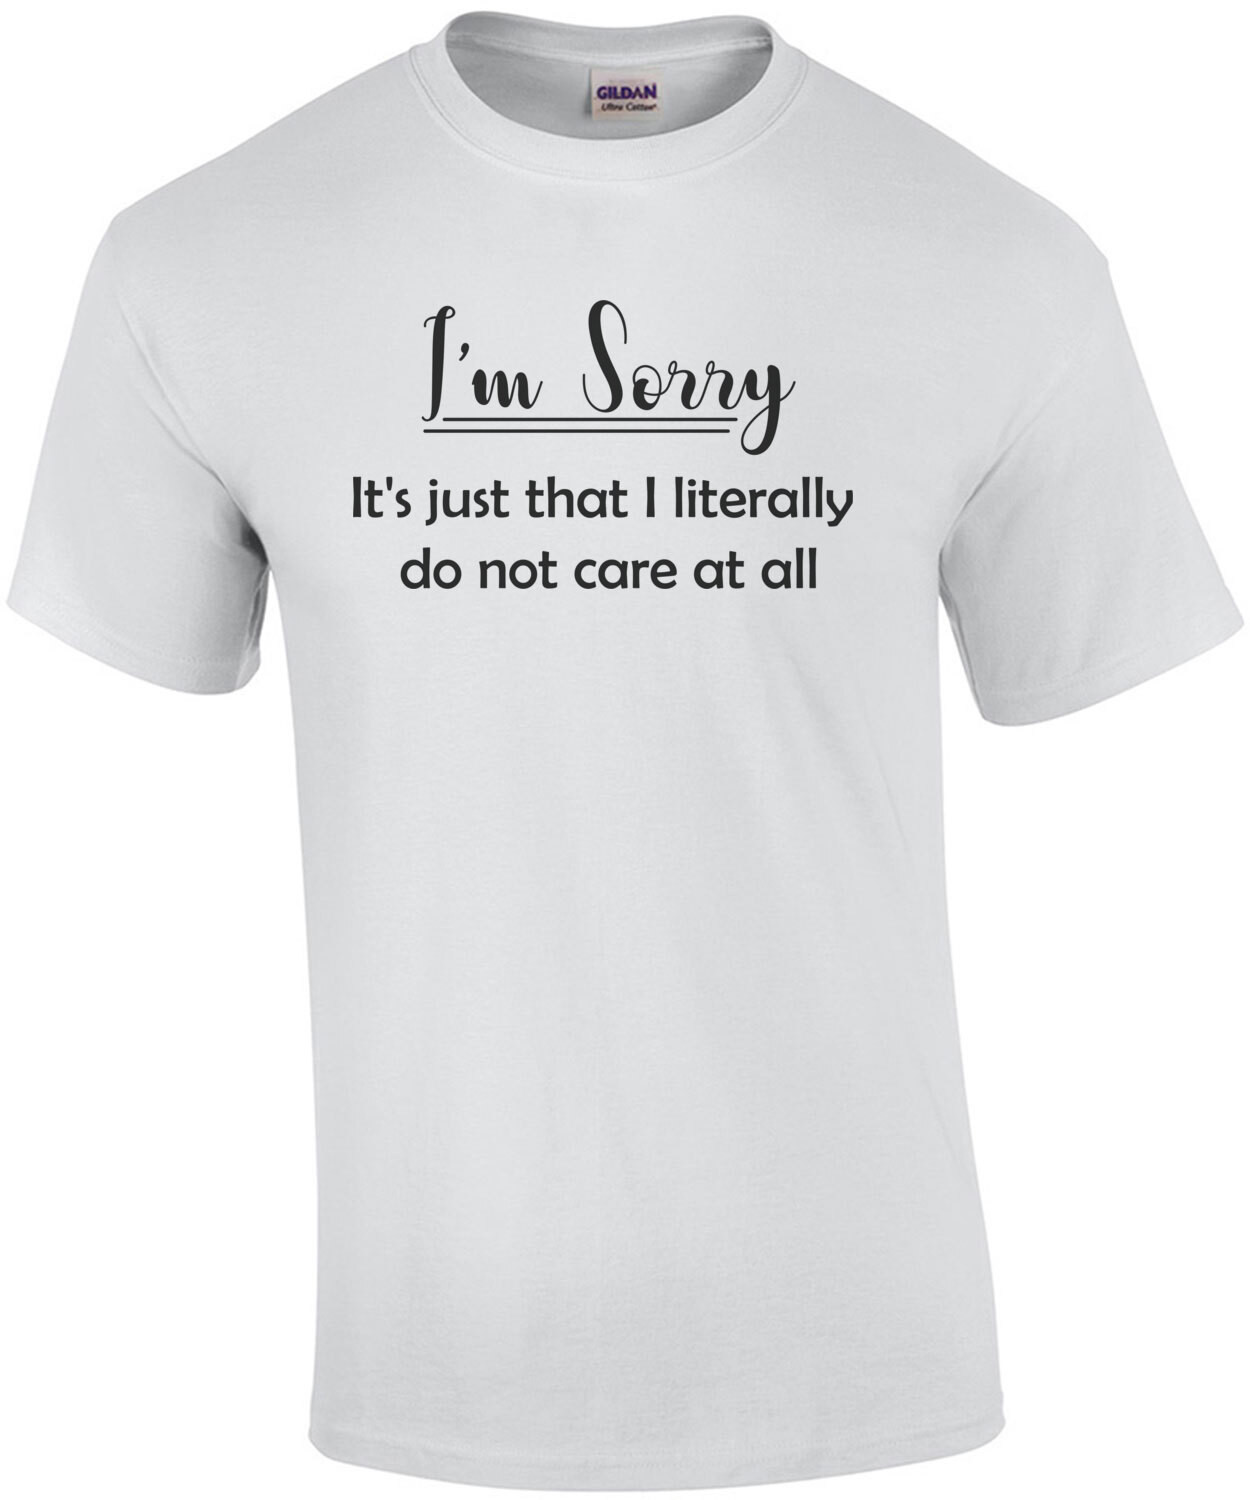 I'm Sorry. It's Just That I Literally Do Not Care At All.  T-Shirt